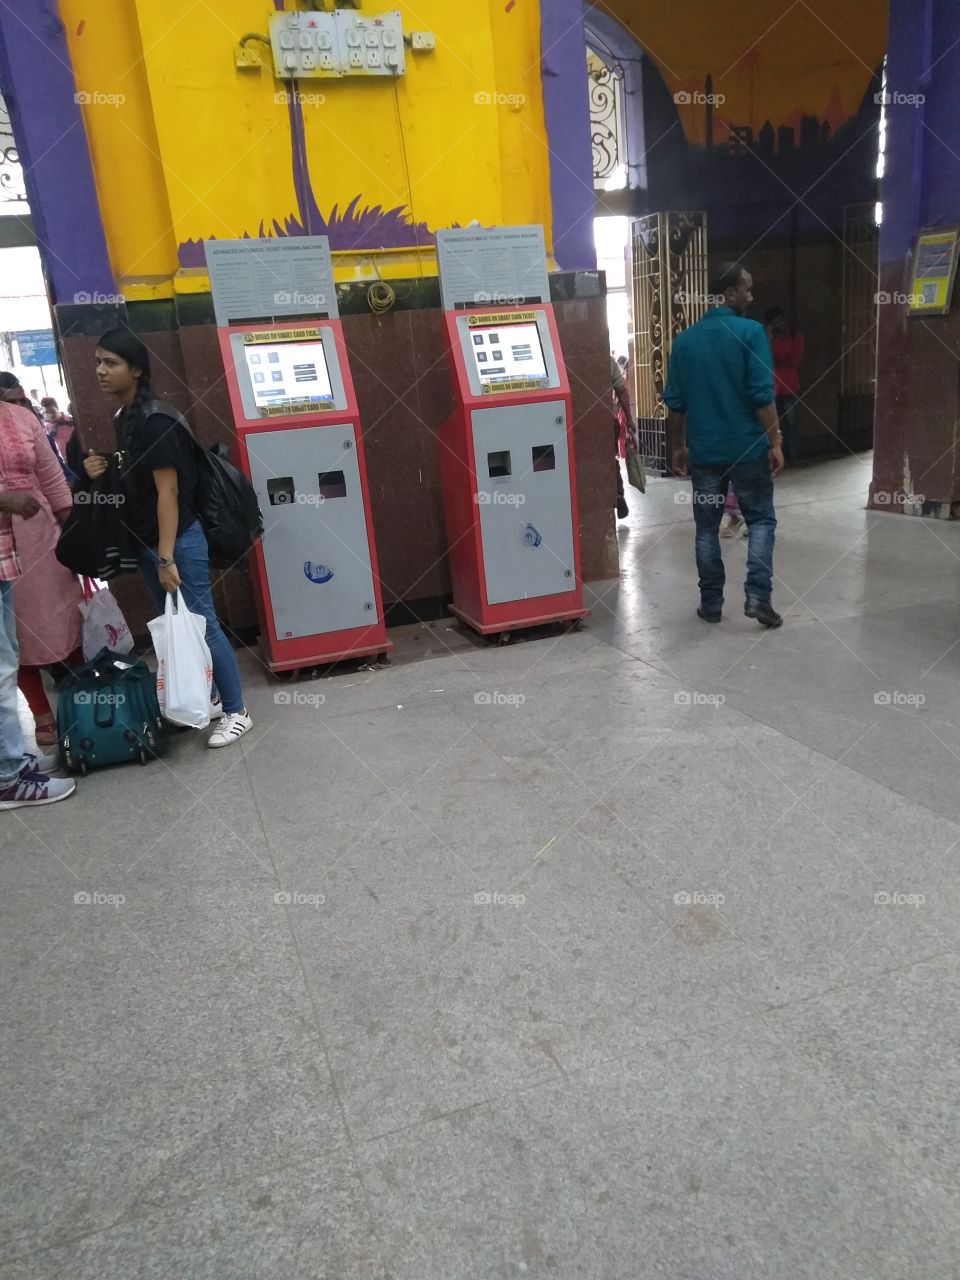 But the other Ticket vending machines are lonely  !! Because more than 99 percent Railway commuters do not have any Railway Smart Card, which costs only Rs. 100